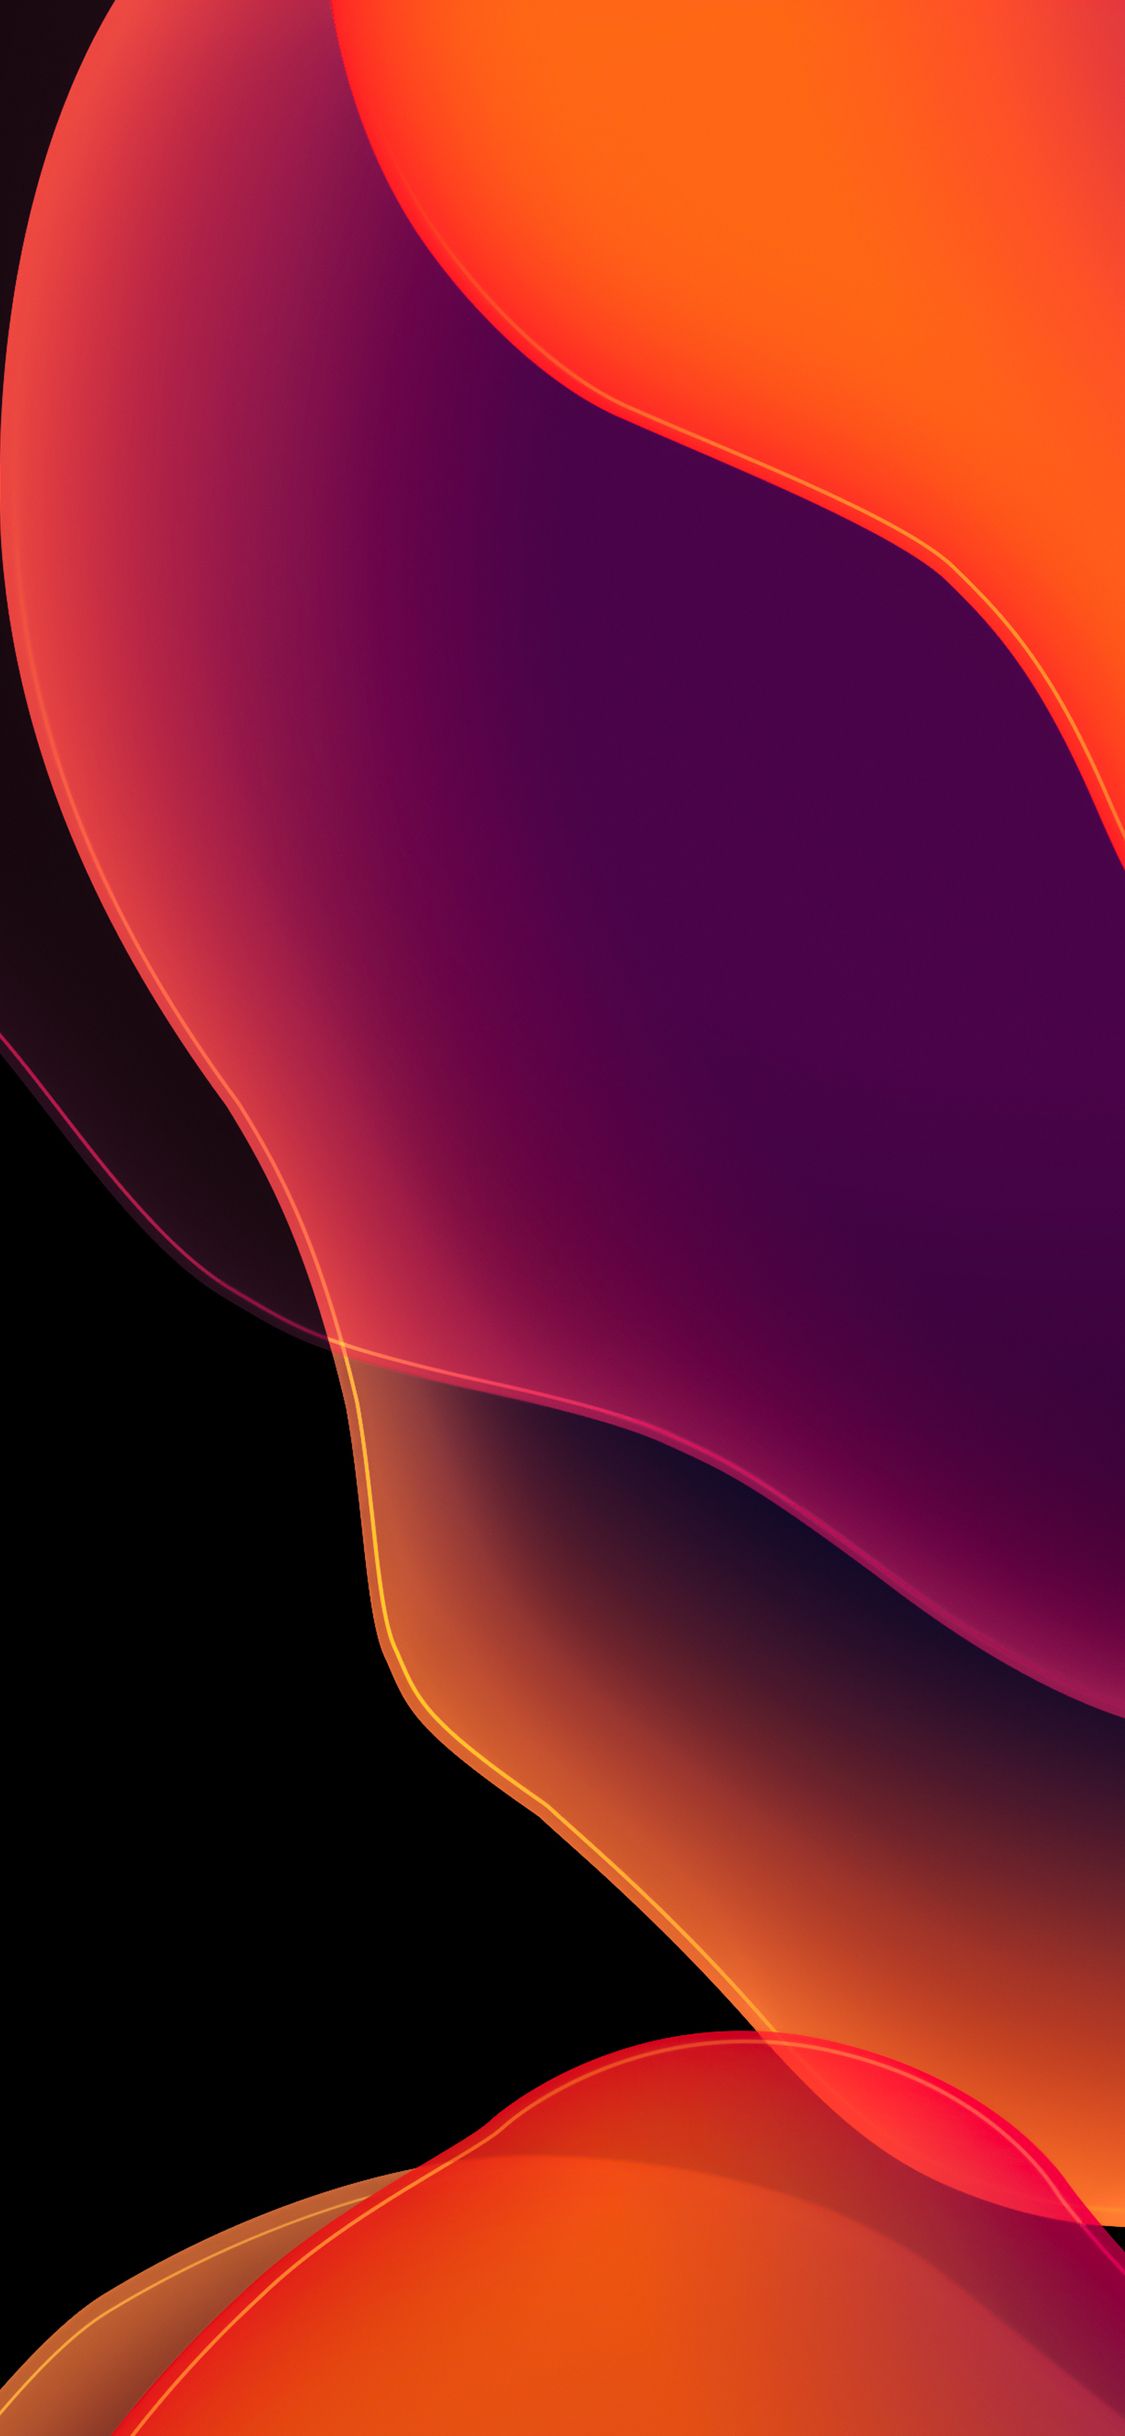 Apple iPhone X Cool HD 4k Wallpapers - Wallpaper Cave